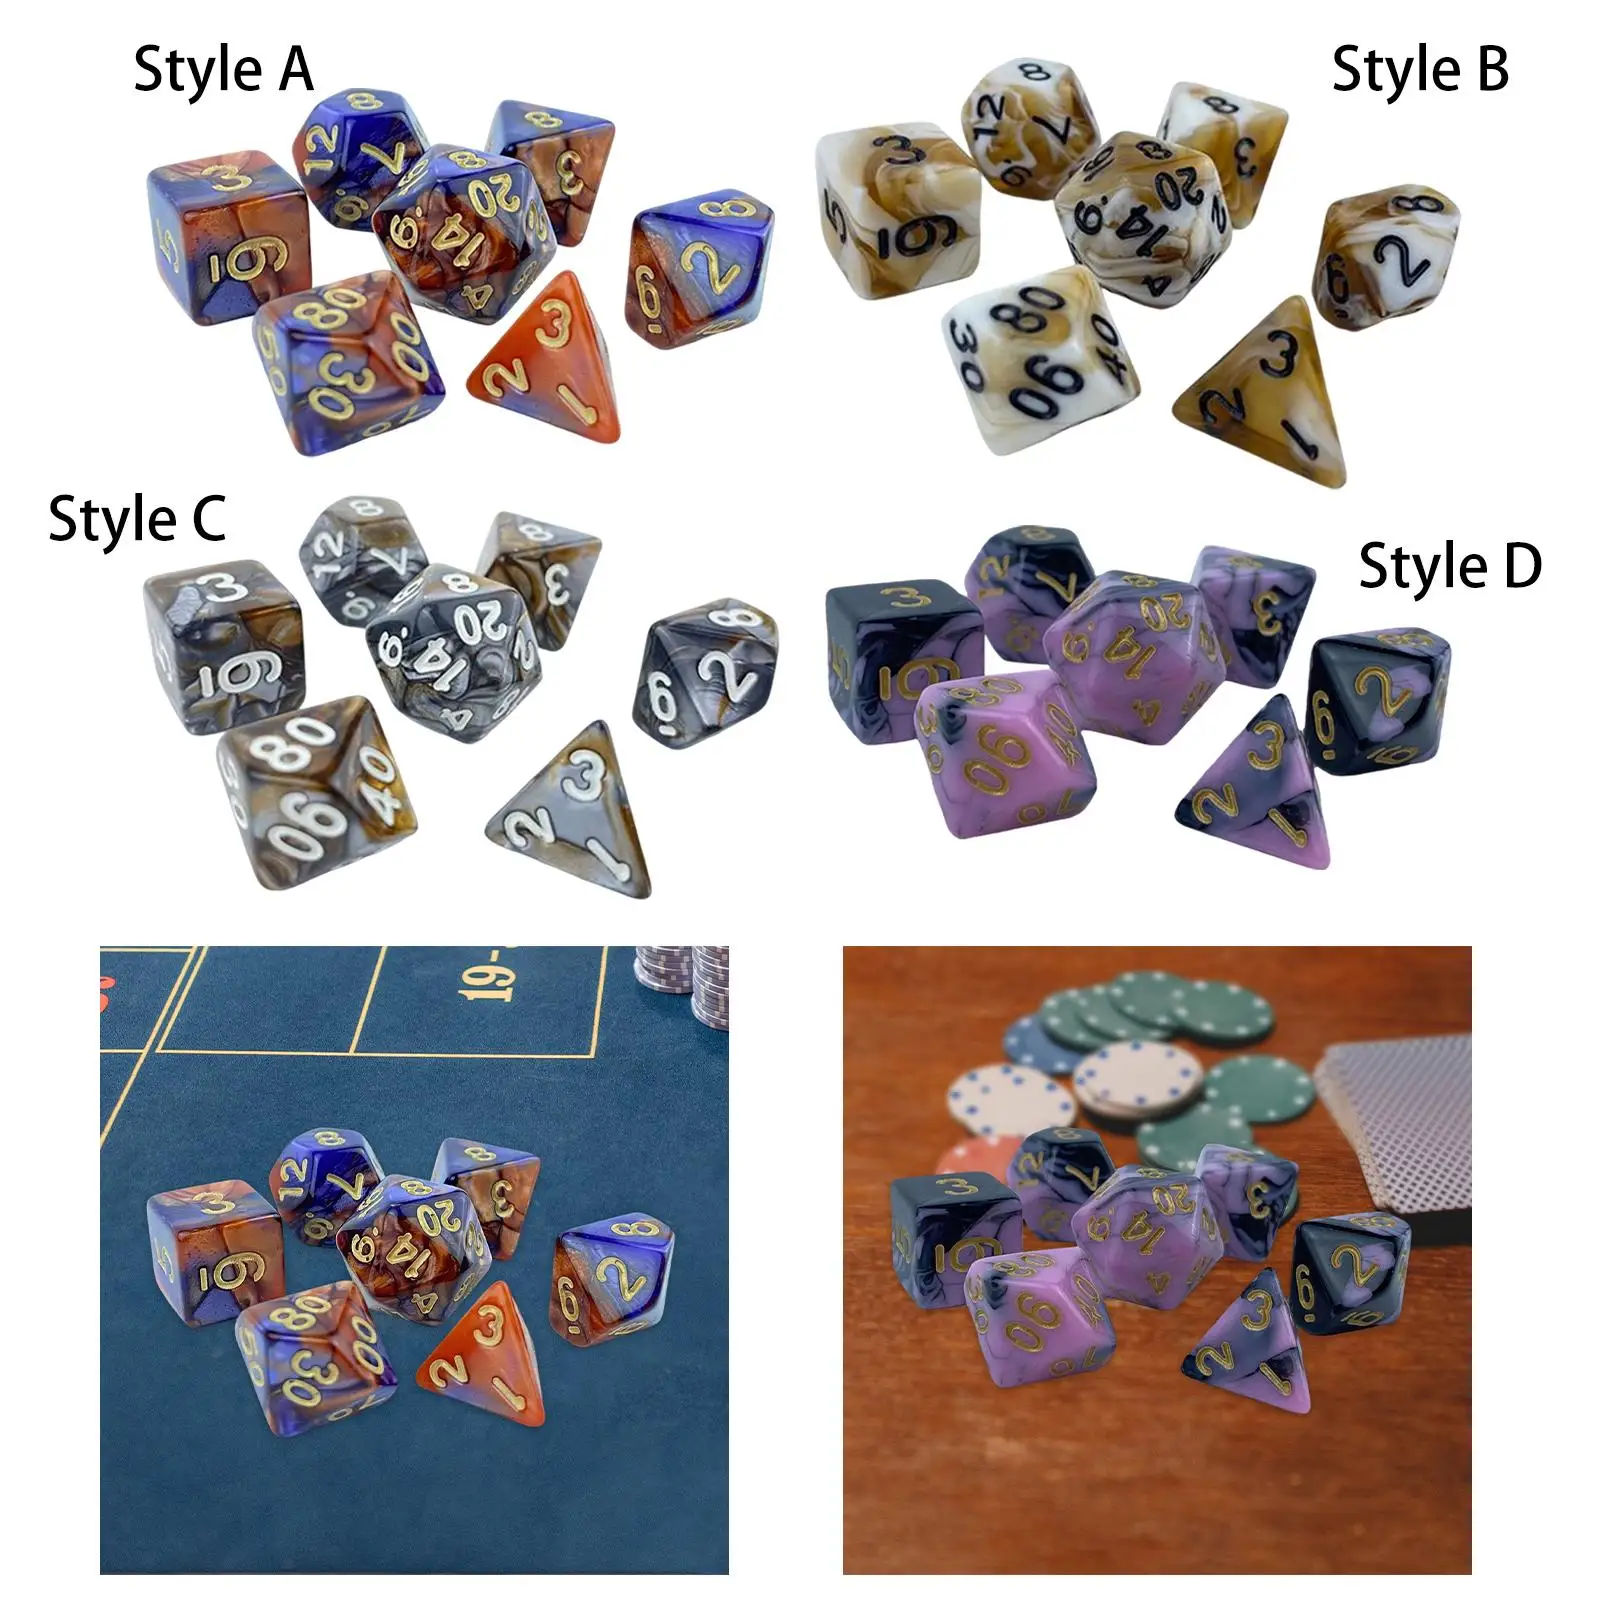 7 Pieces Polyhedral Dice Set Role Playing Dice Table Board Roll Playing Games for RPG Party Supply